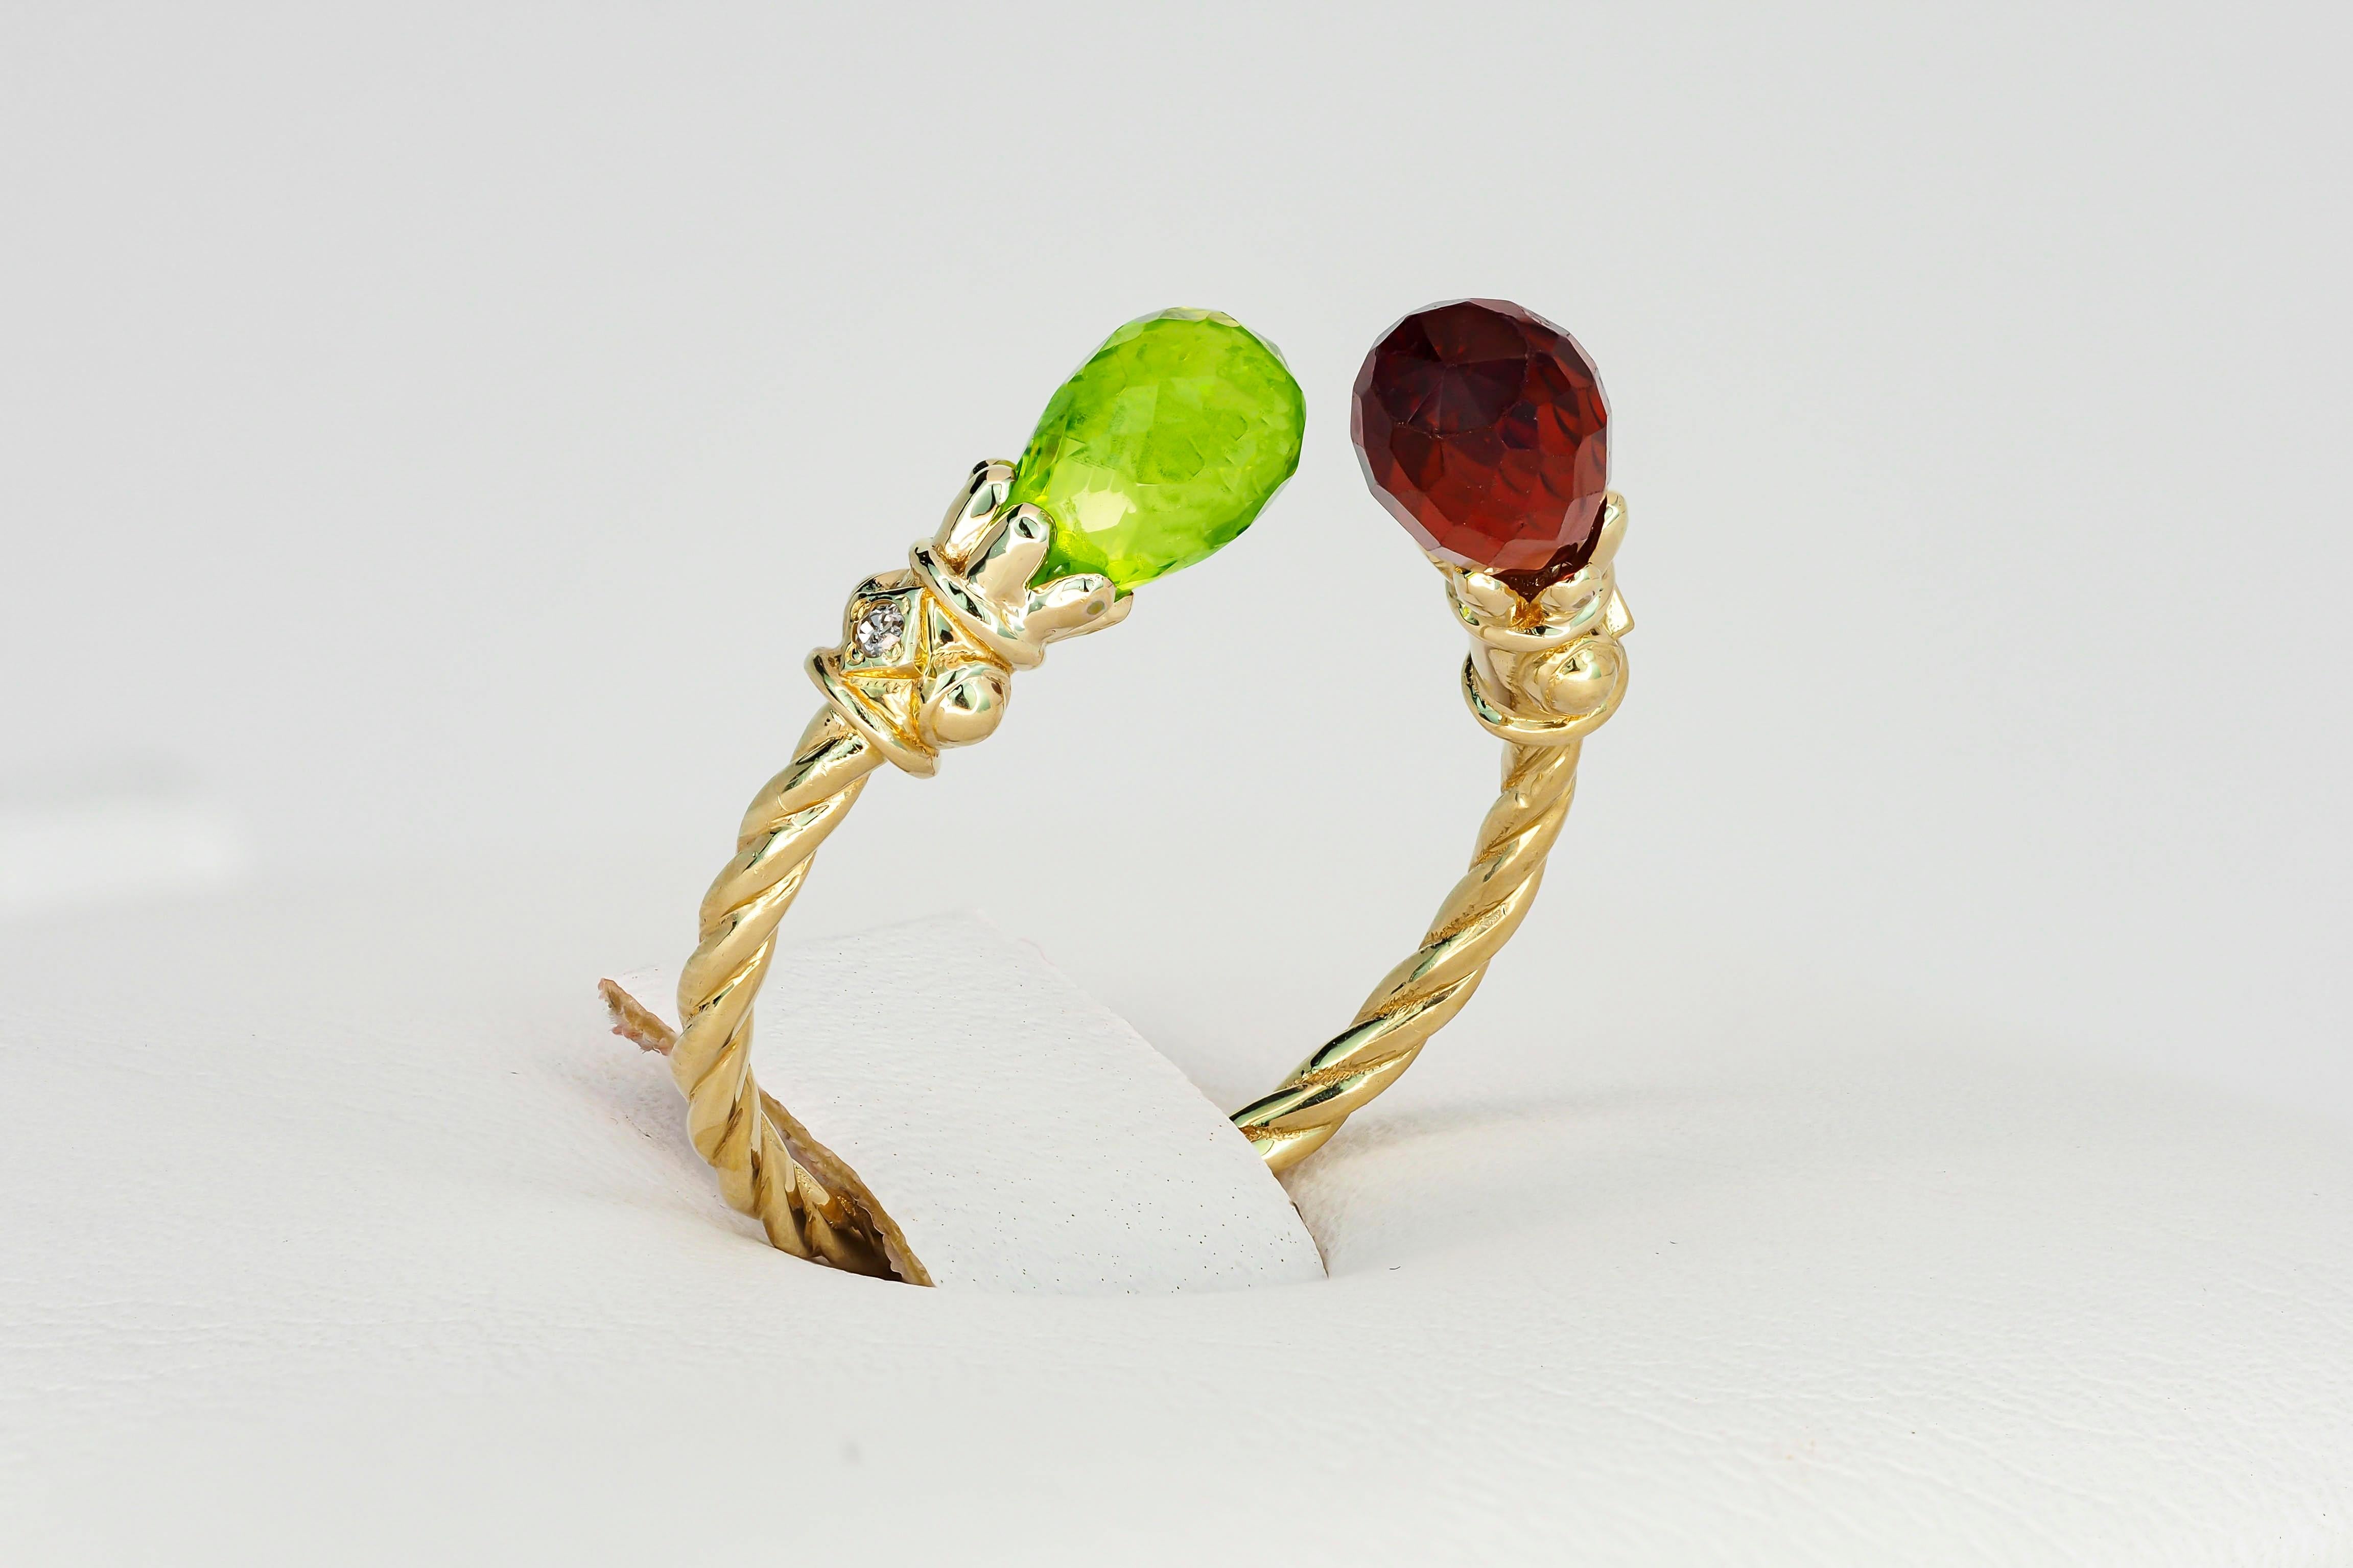 For Sale:   Open ended gold ring with peridot, garnet and diamonds 17